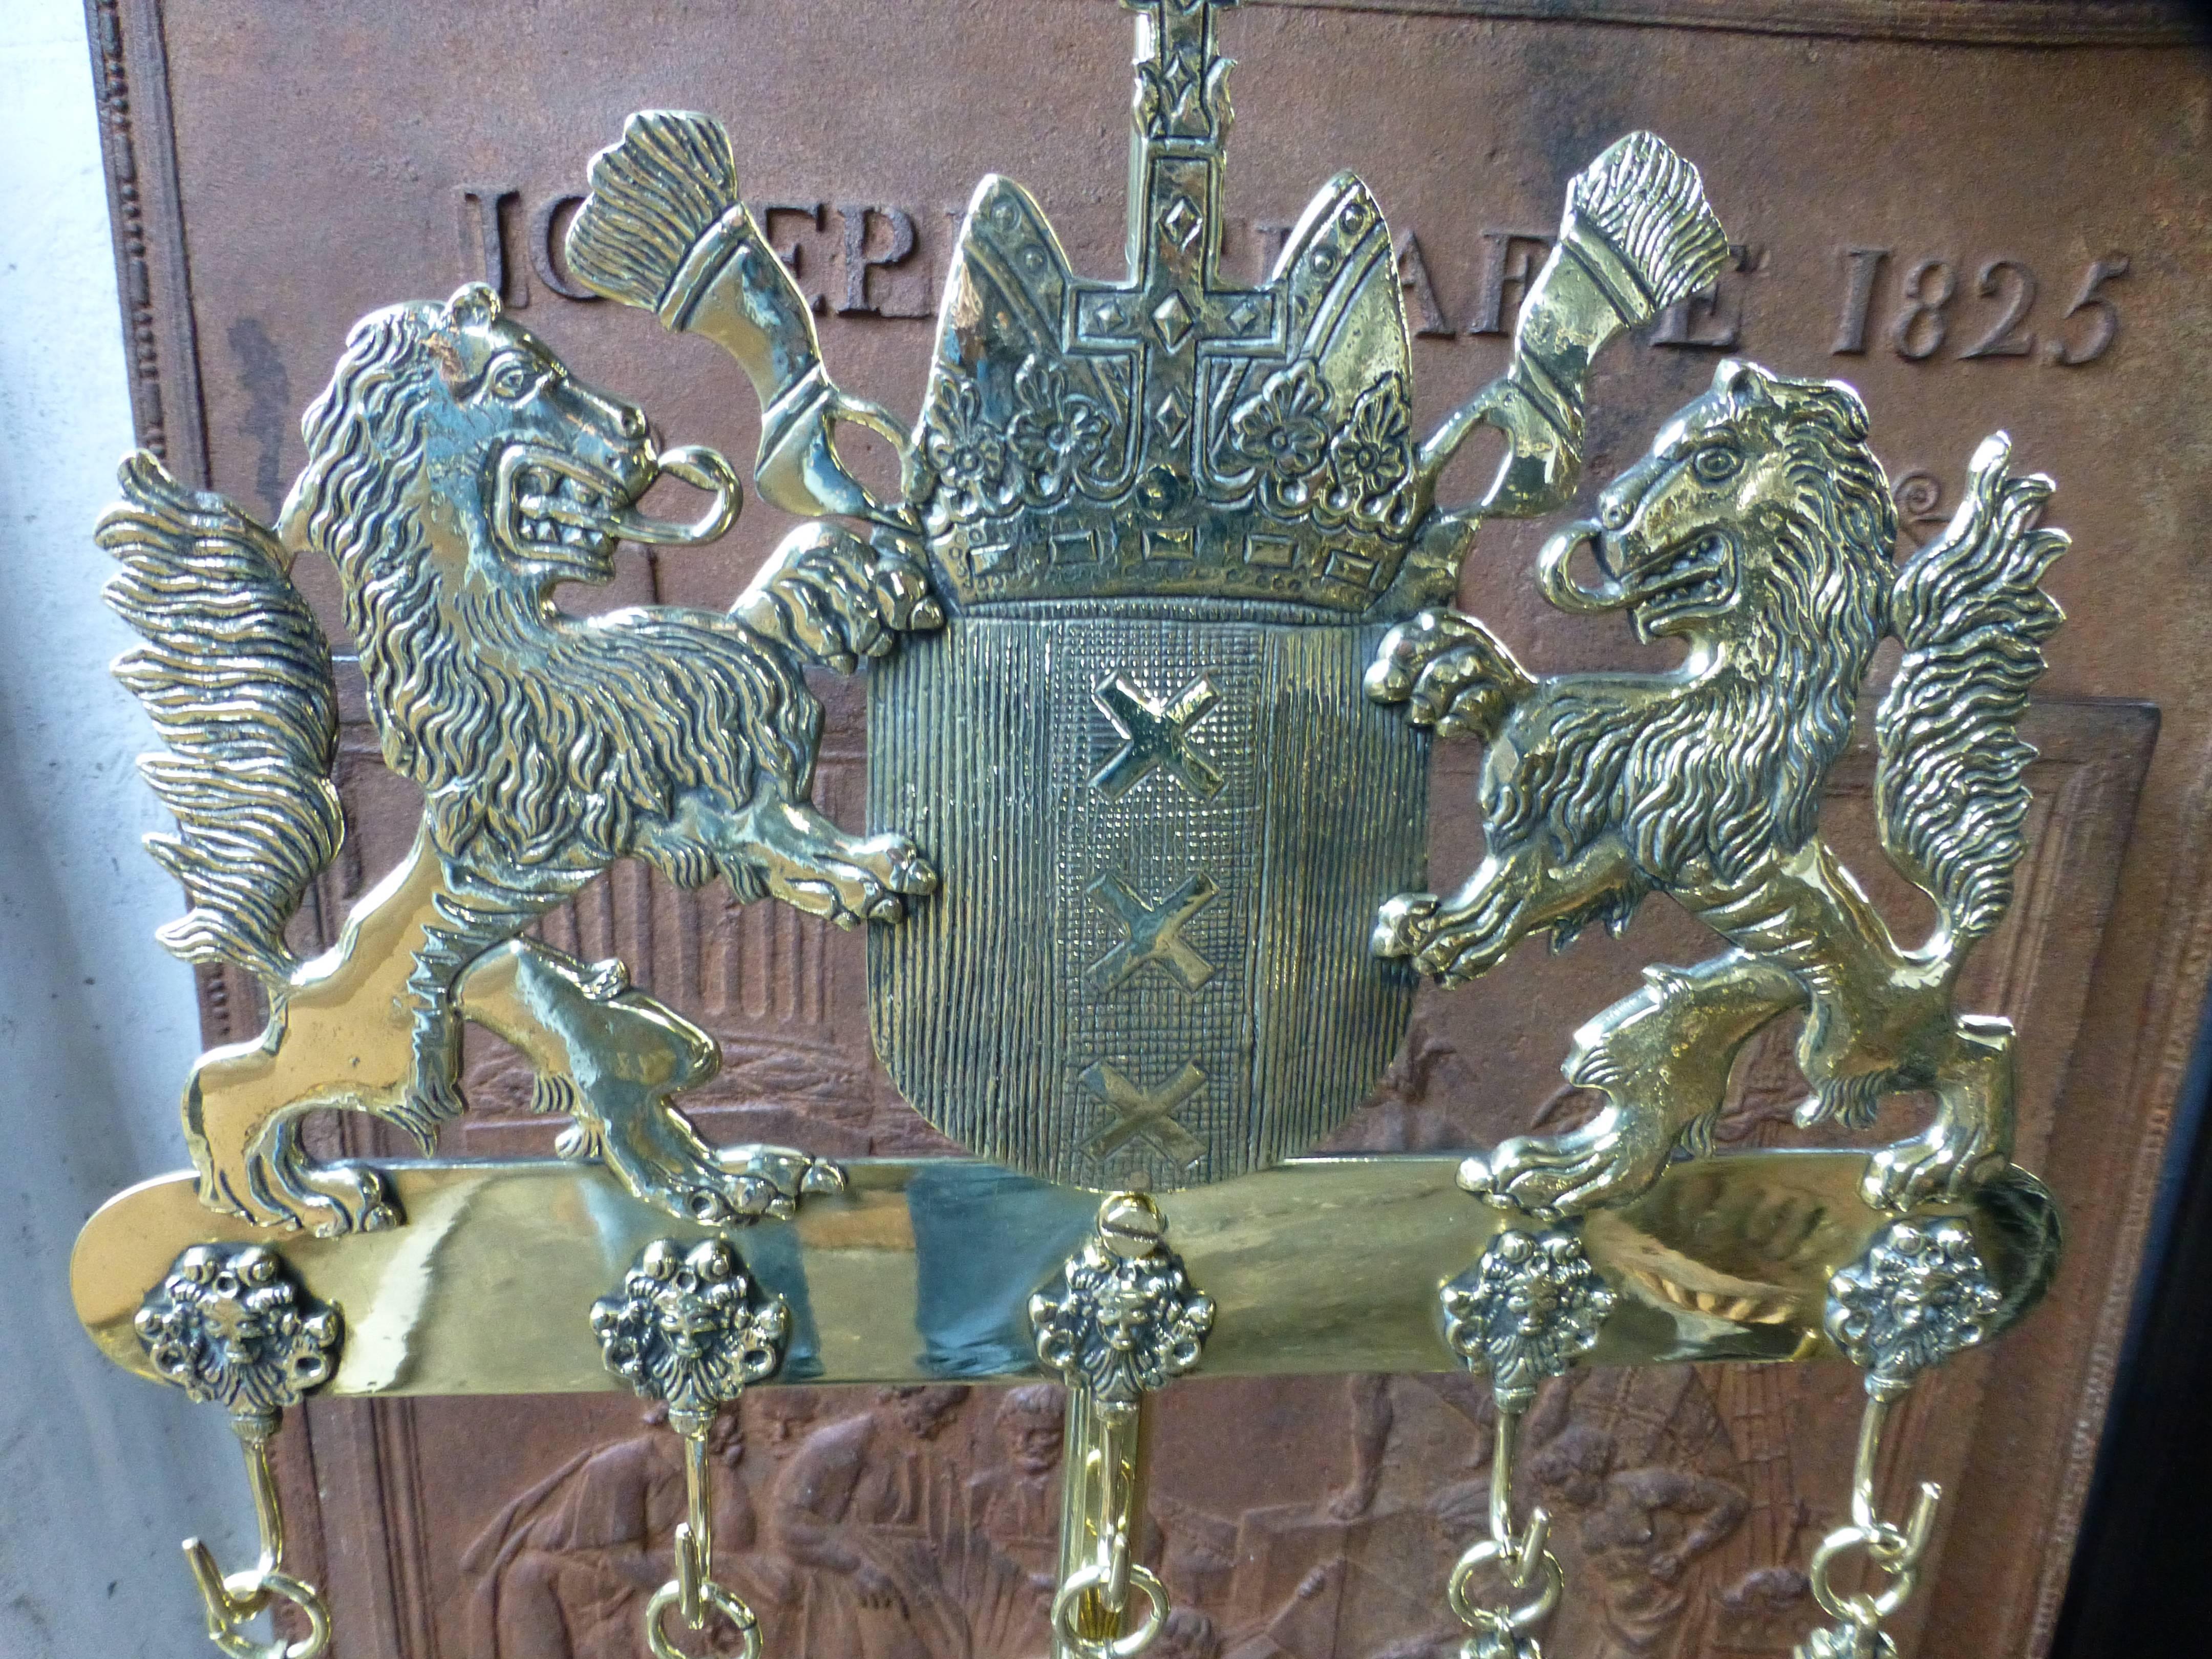 Exceptionally heavy and sturdy fire tool set with the coat of arms of Amsterdam. 19th Century.

We have a unique and specialized collection of antique and used fireplace accessories consisting of more than 1000 listings at 1stdibs. Amongst others we